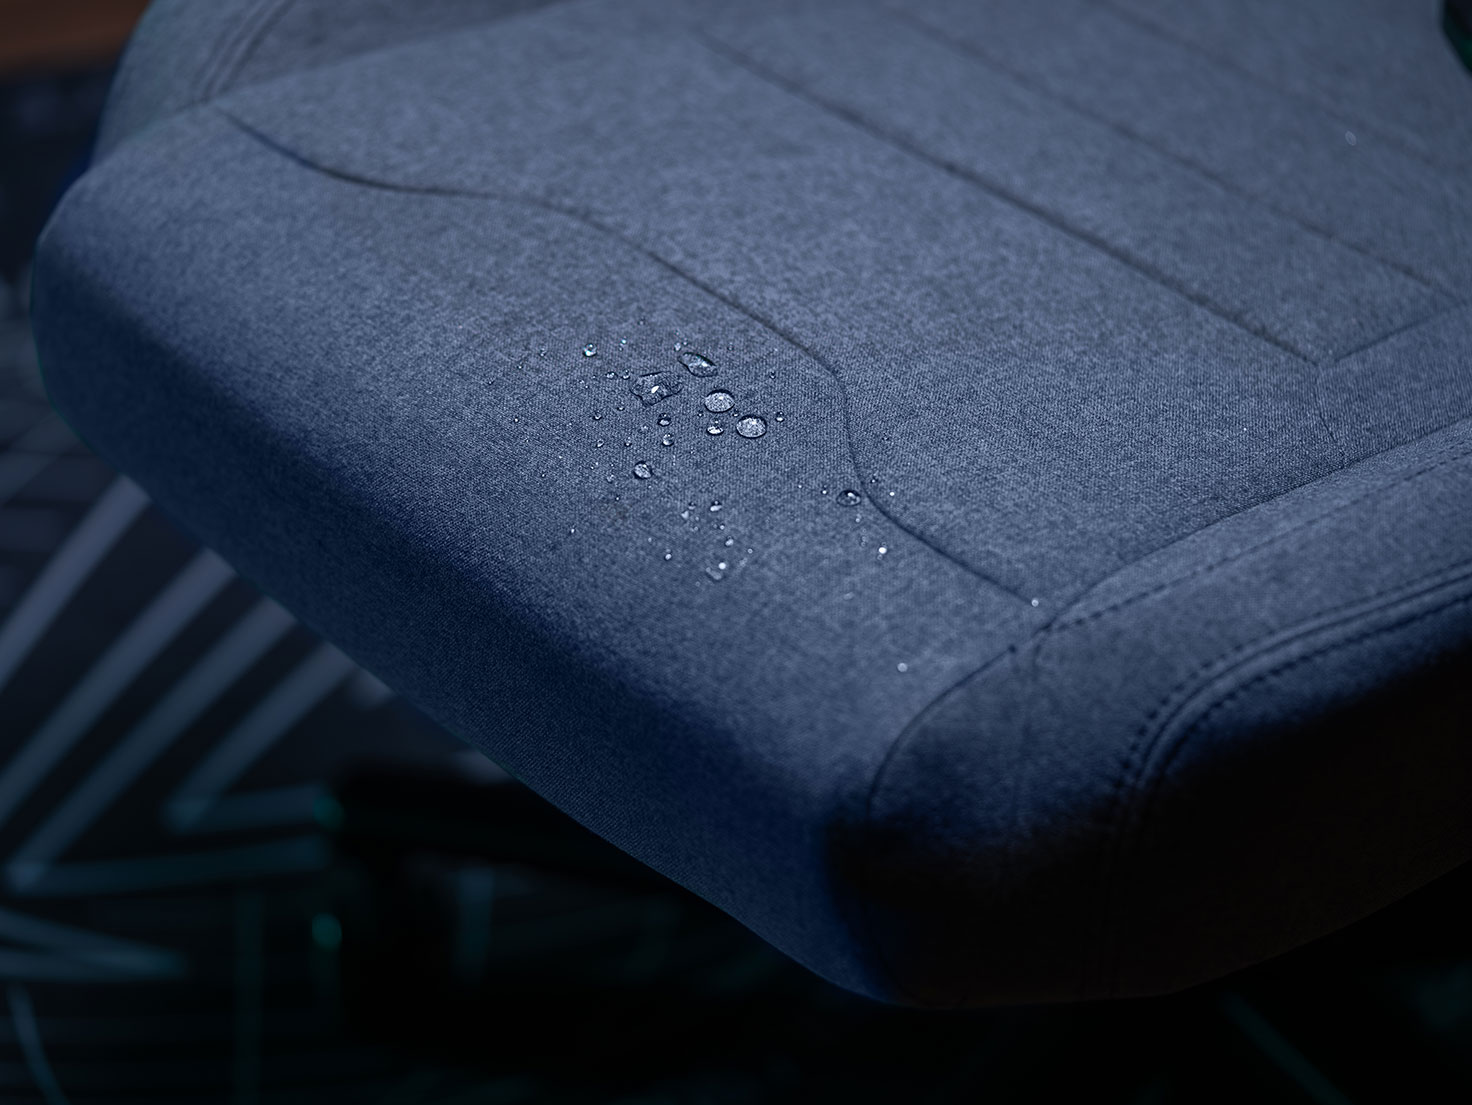 The water droplets on the fabric showcase its water-repellent feature